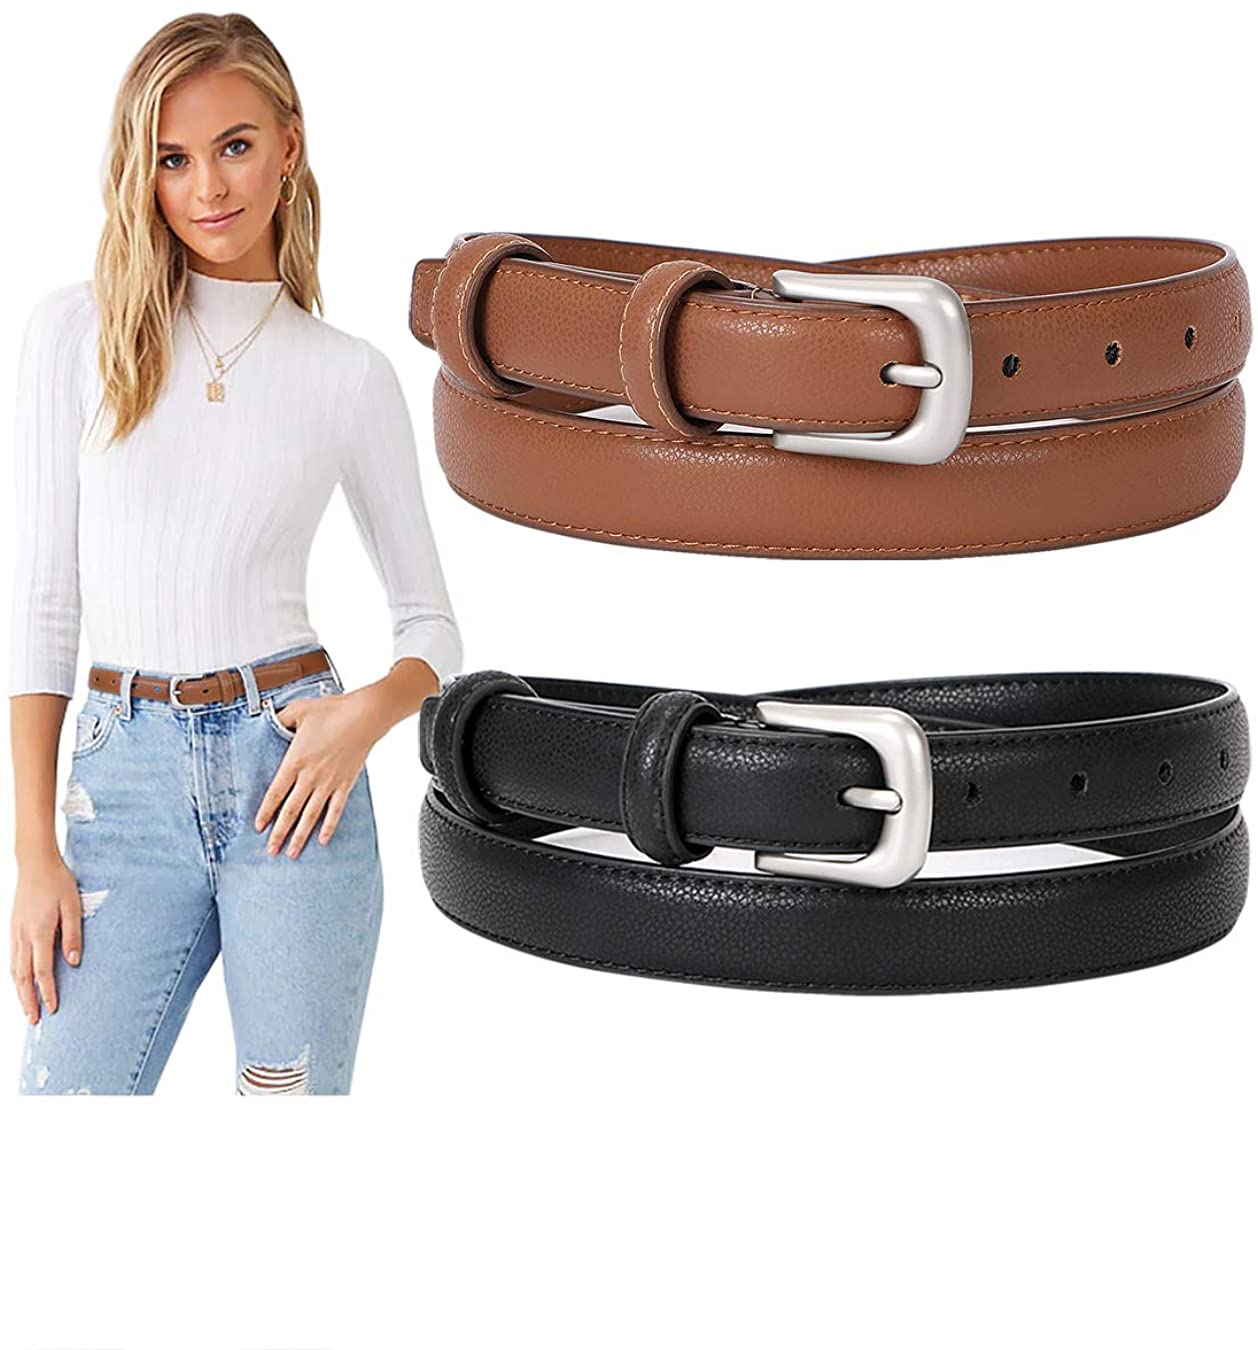 SUOSDEY Women Leather Belt Fashion Double O-Ring Soft Faux Leather Waist Belts for Jeans Dress